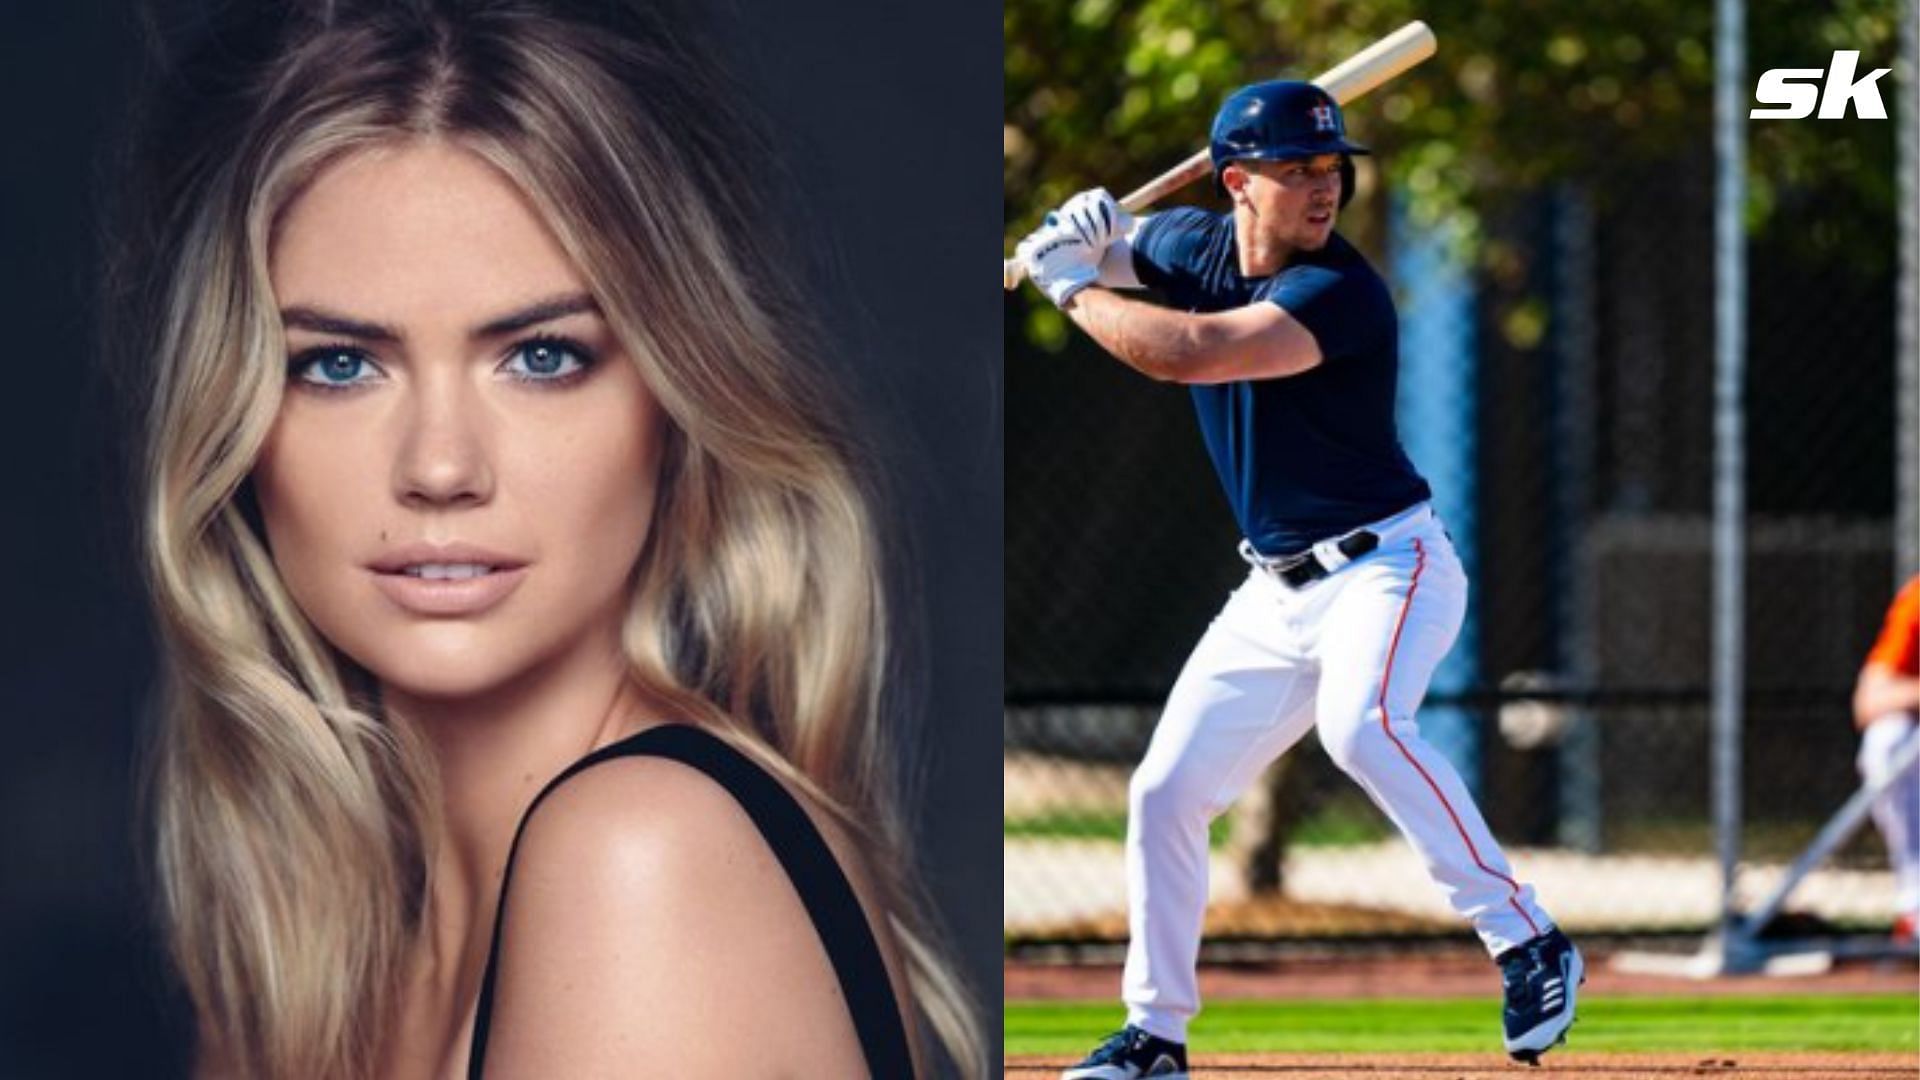 Amid the Crazied Kate Upton and Justin Verlander Wedding Frenzy, Alex  Bregman Low Key Steals the Show